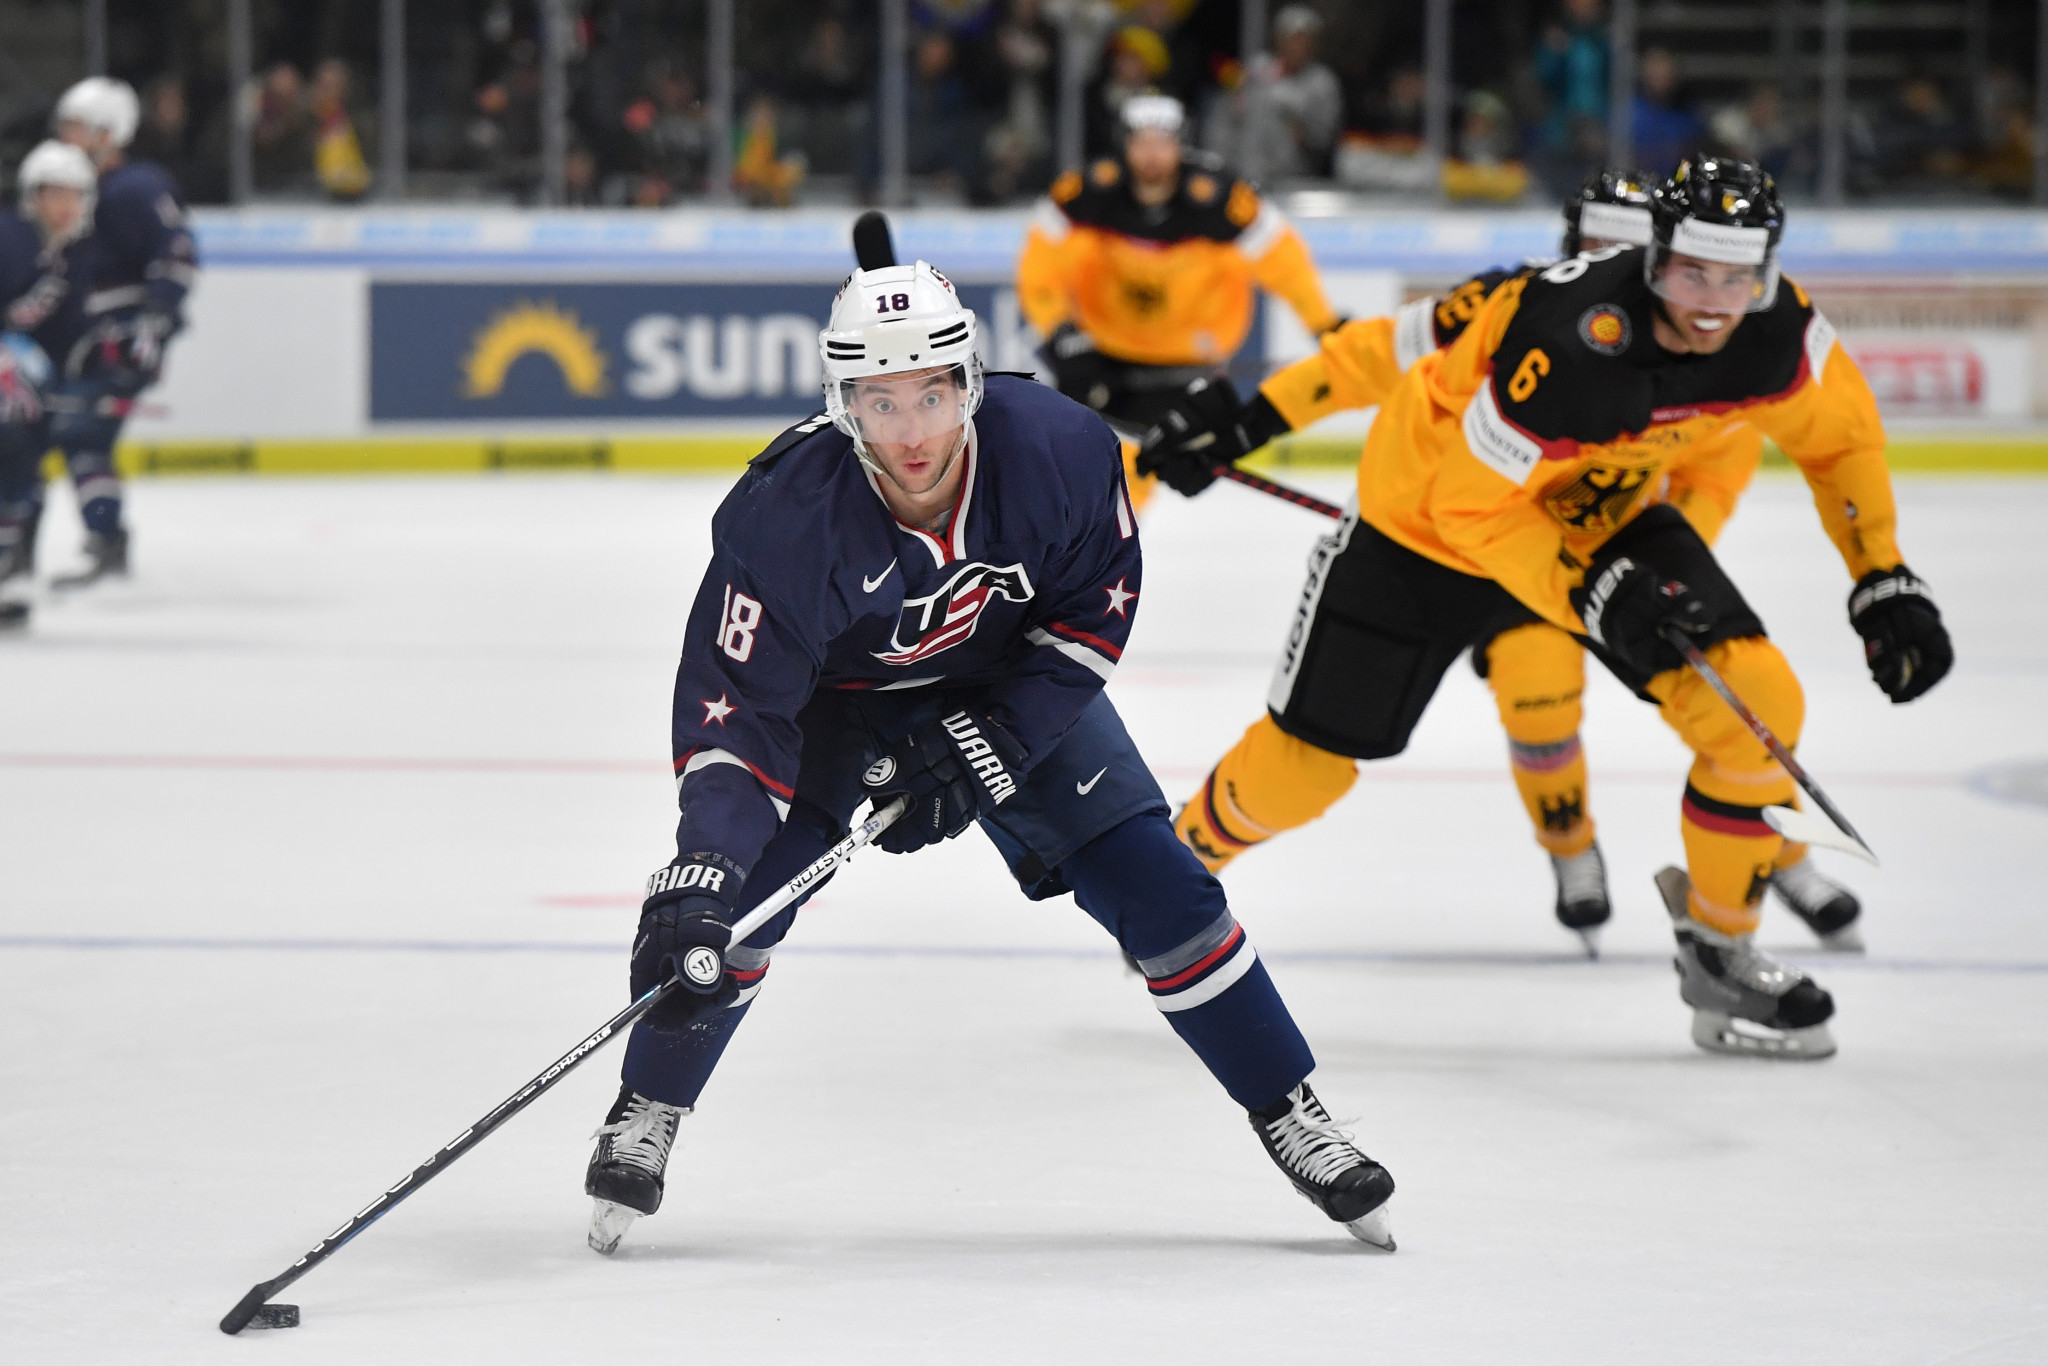 The agreement was signed during the during the Deutschland Cup in Augsburg where Dan Sexston, of the US, is seen here in action against Germany ©Getty Images